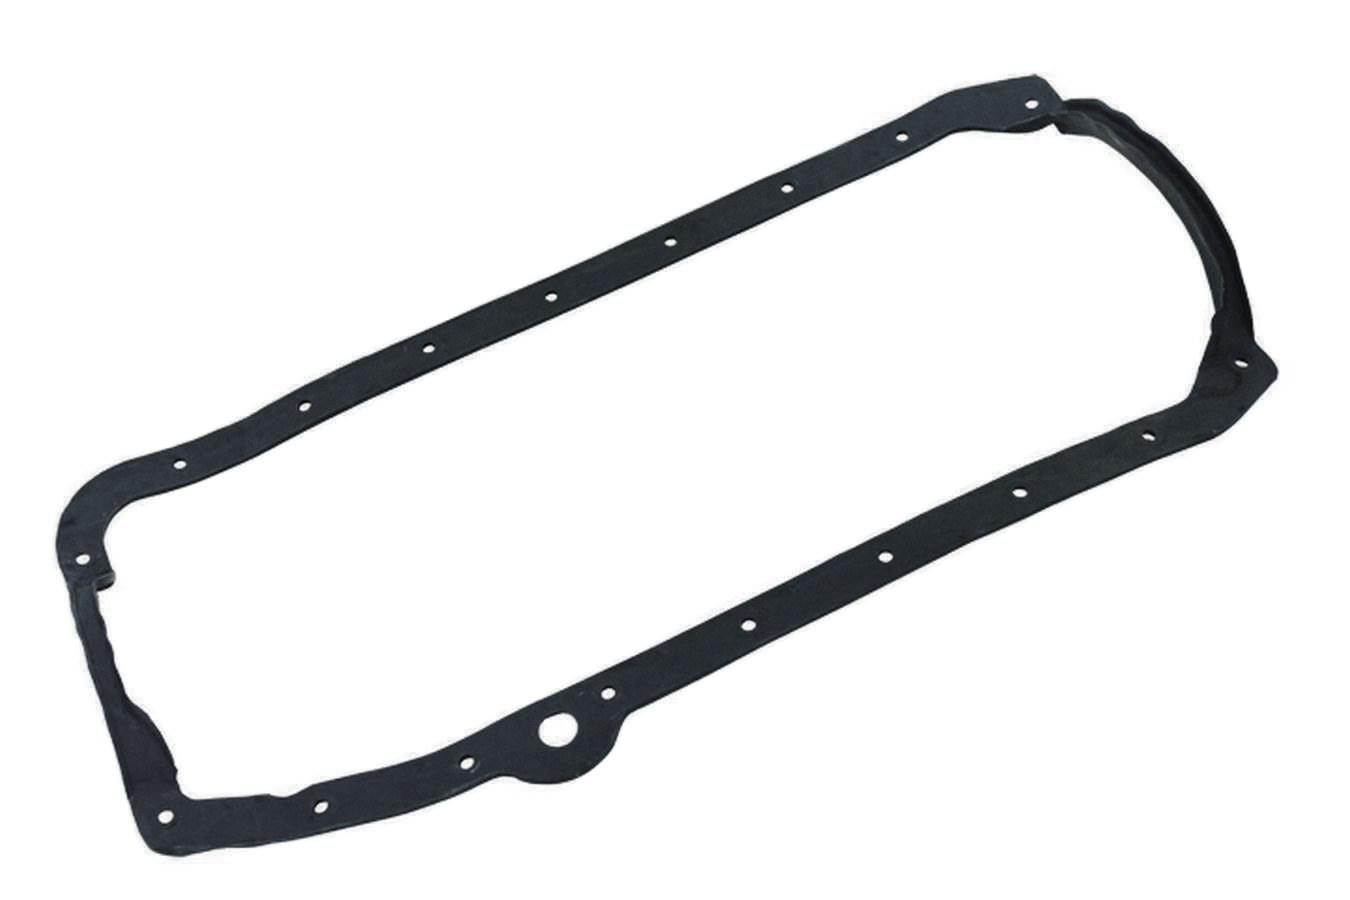 Specialty Products 6105 Oil Pan Gasket, 1-Piece, Steel Core Rubber, 2-Piece Seal, Small Block Chevy, Each